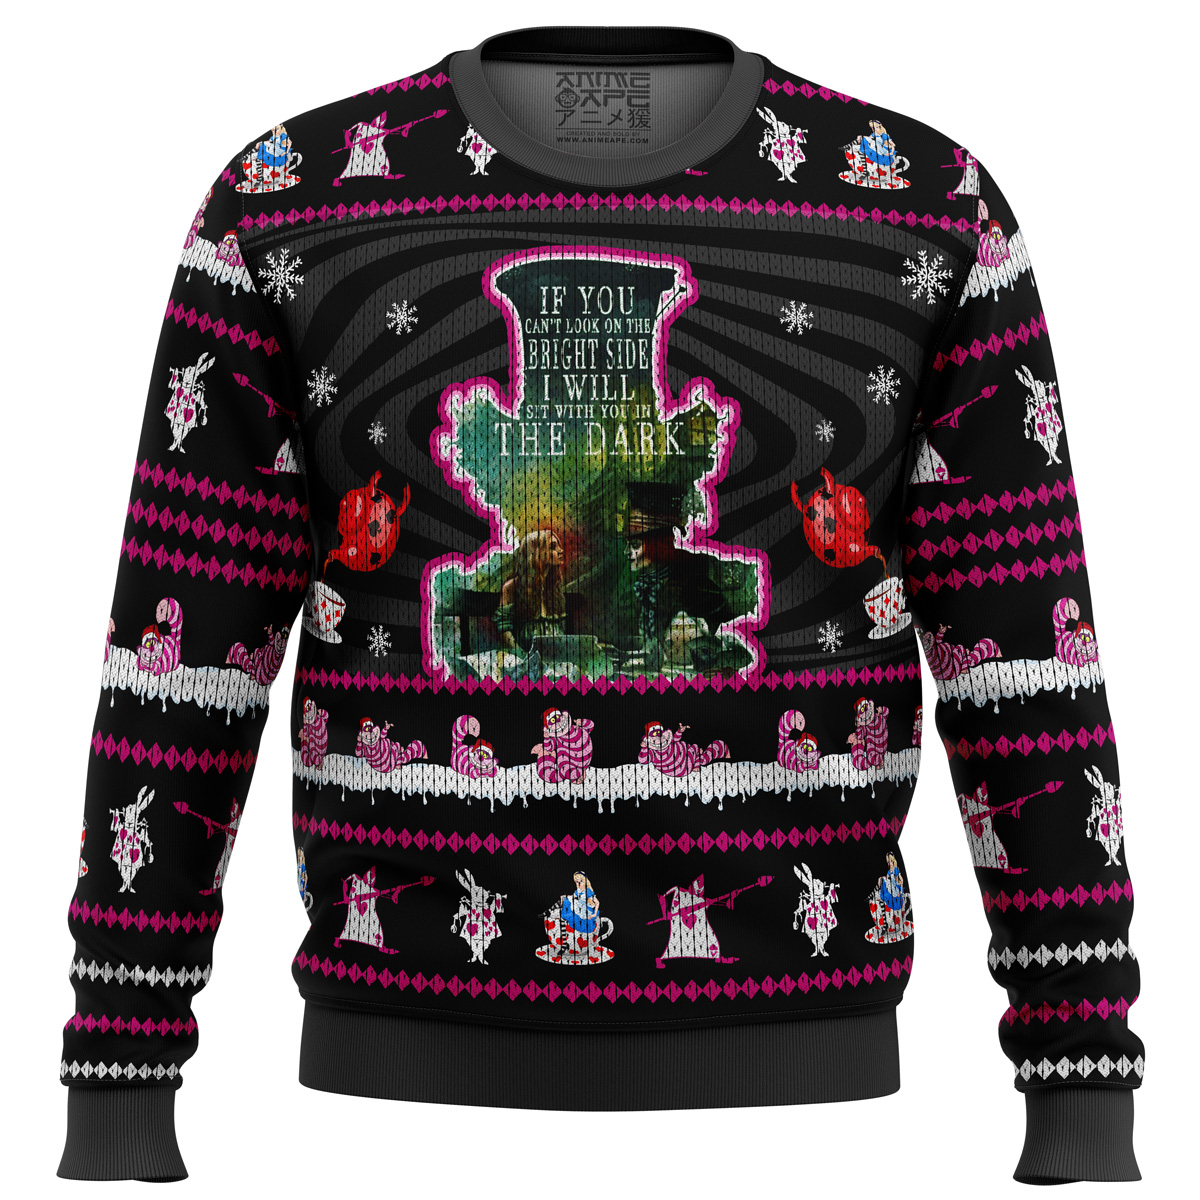 mad hatter alice in wonderland ugly christmas sweater ana2207 8276 - Fandomaniax Store